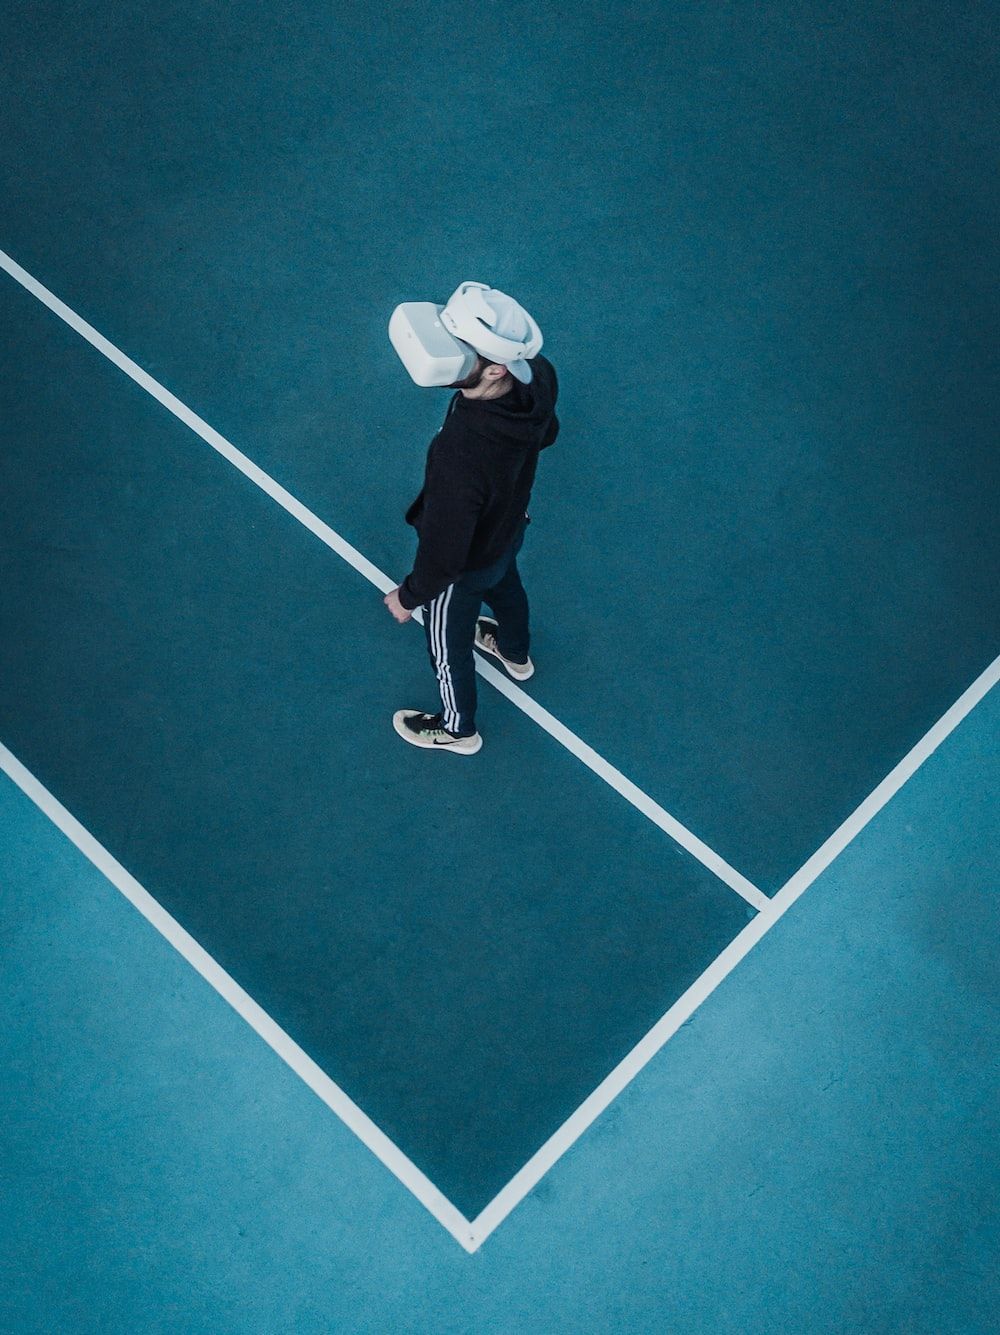 Man in track suit wearing VR headset standing on tennis court photo